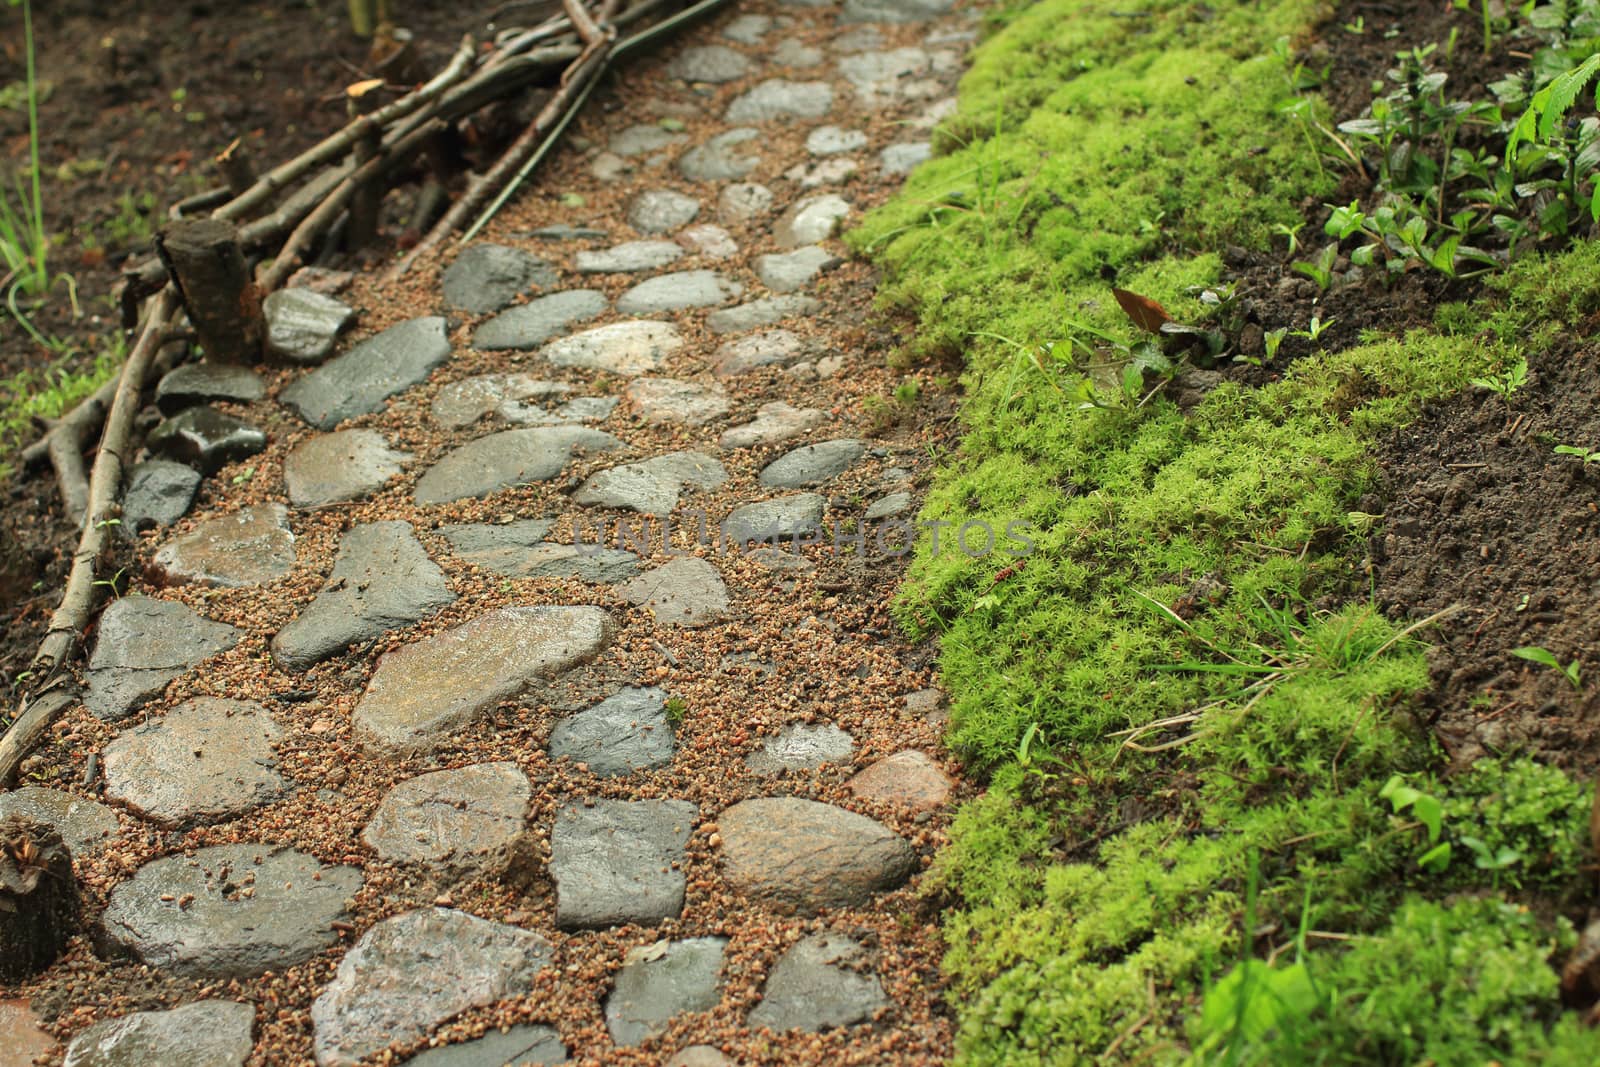 Cobbled footpath in the garden morning